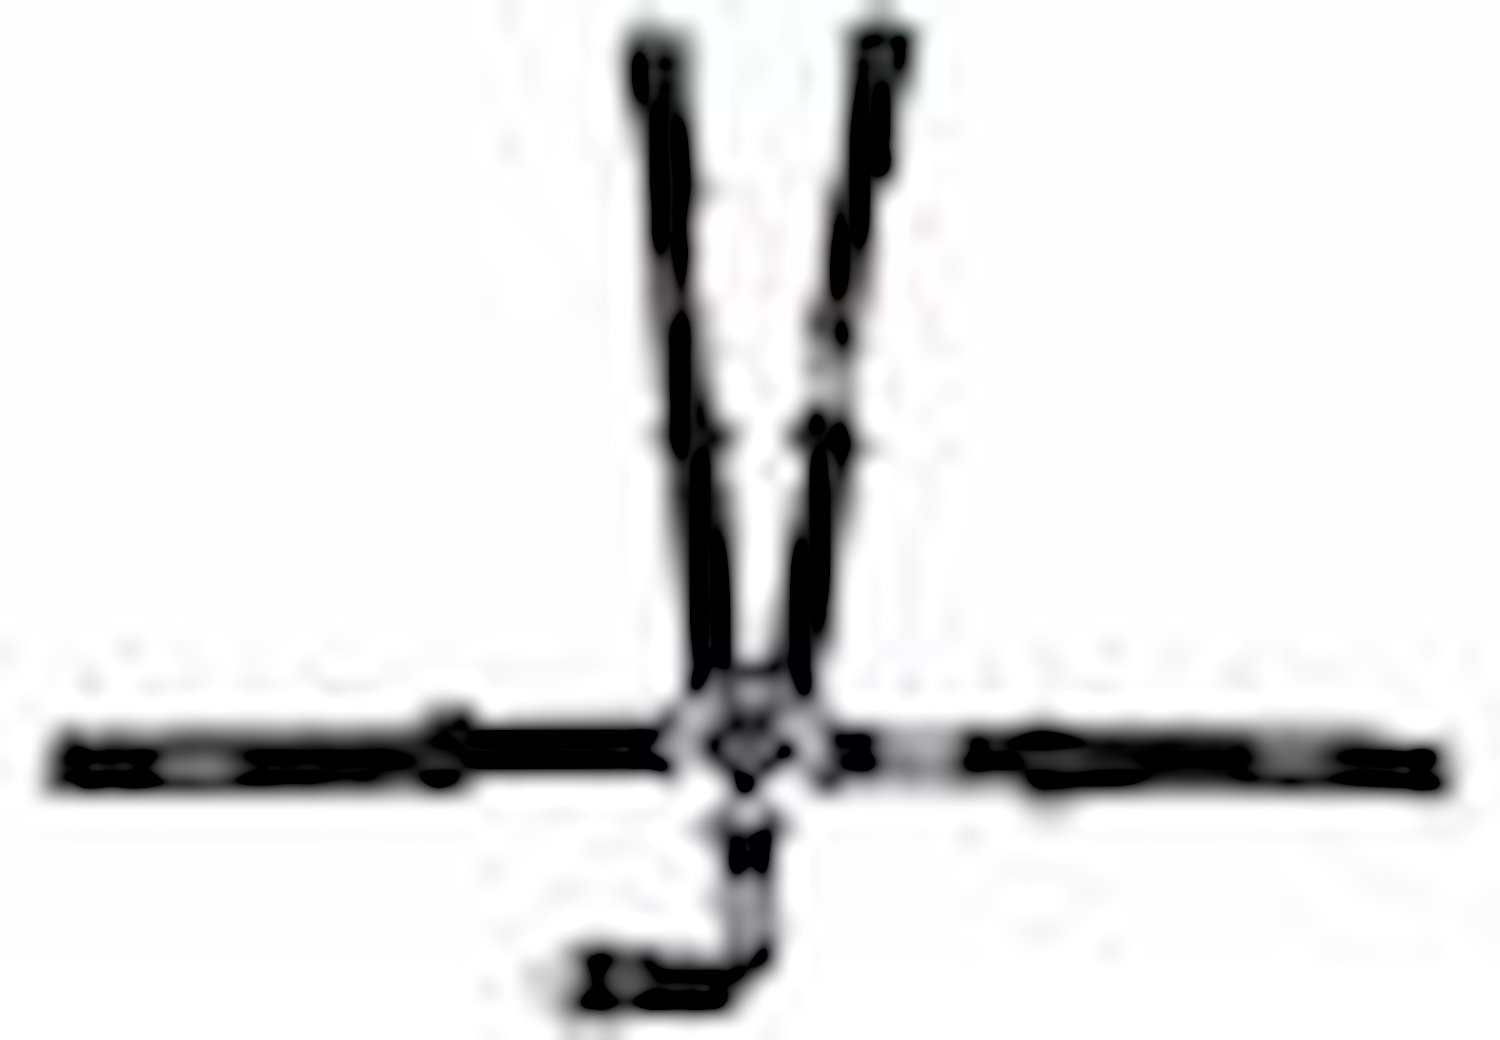 SFI 16.1 CAM-LOCK HARNESS 2 PULL UP Lap Belt 2 Shoulder Harness V ROLL BAR Mount 2 DOUBLE Sub ALL BOLT ENDS w/STERNUM STRAP RED